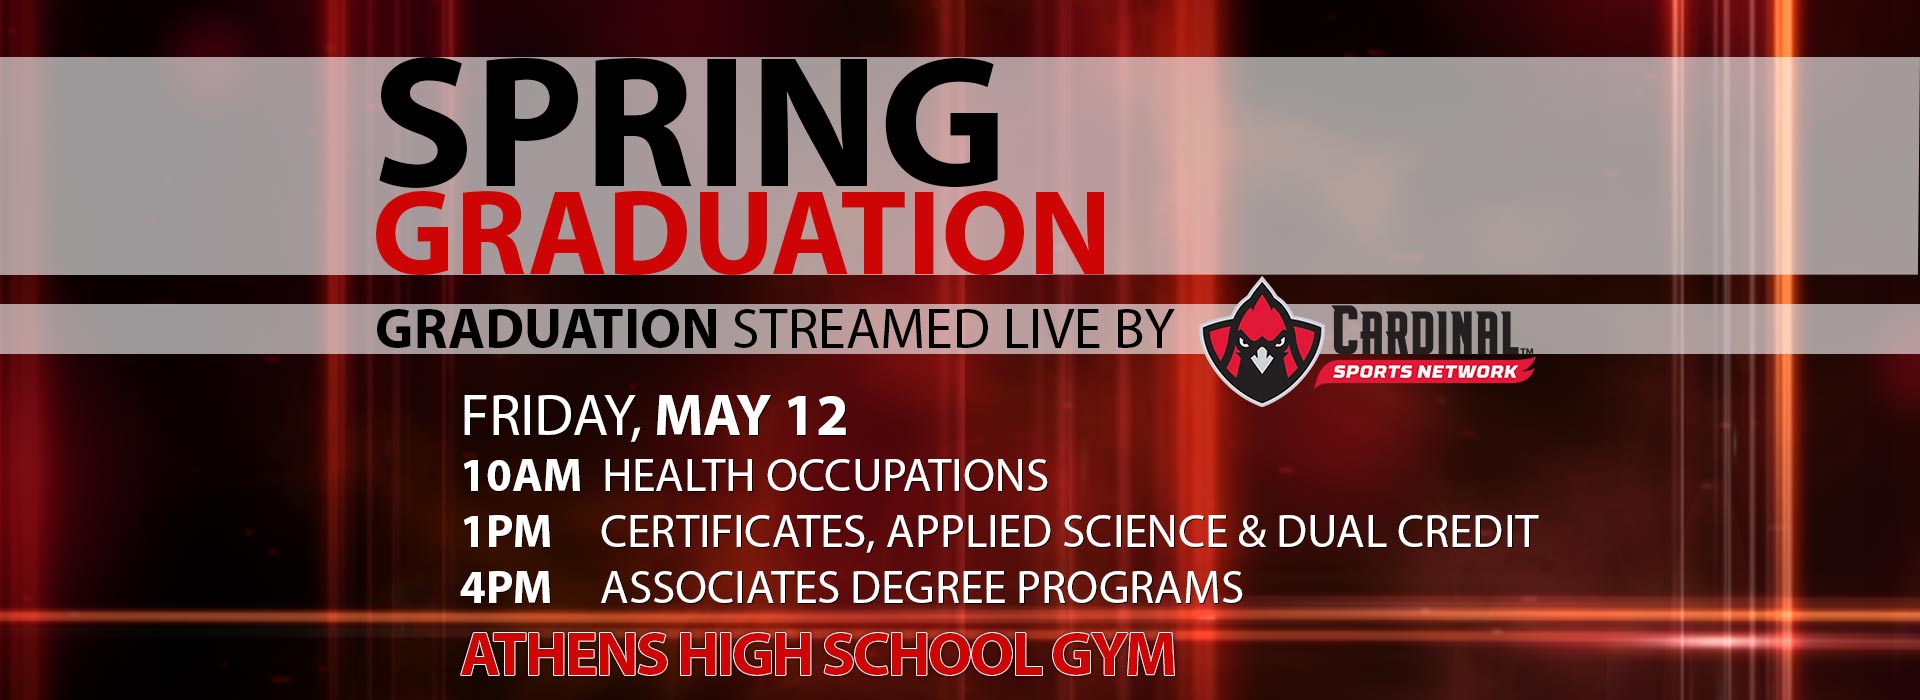 Spring Graduation streamed live by Cardinal Sports Network. Friday, May 12: 10AM- Health Occupations, 1PM- Certificates, Applied Science and Dual Credit, 4PM- Associates Degree Programs, Athens High School Gym